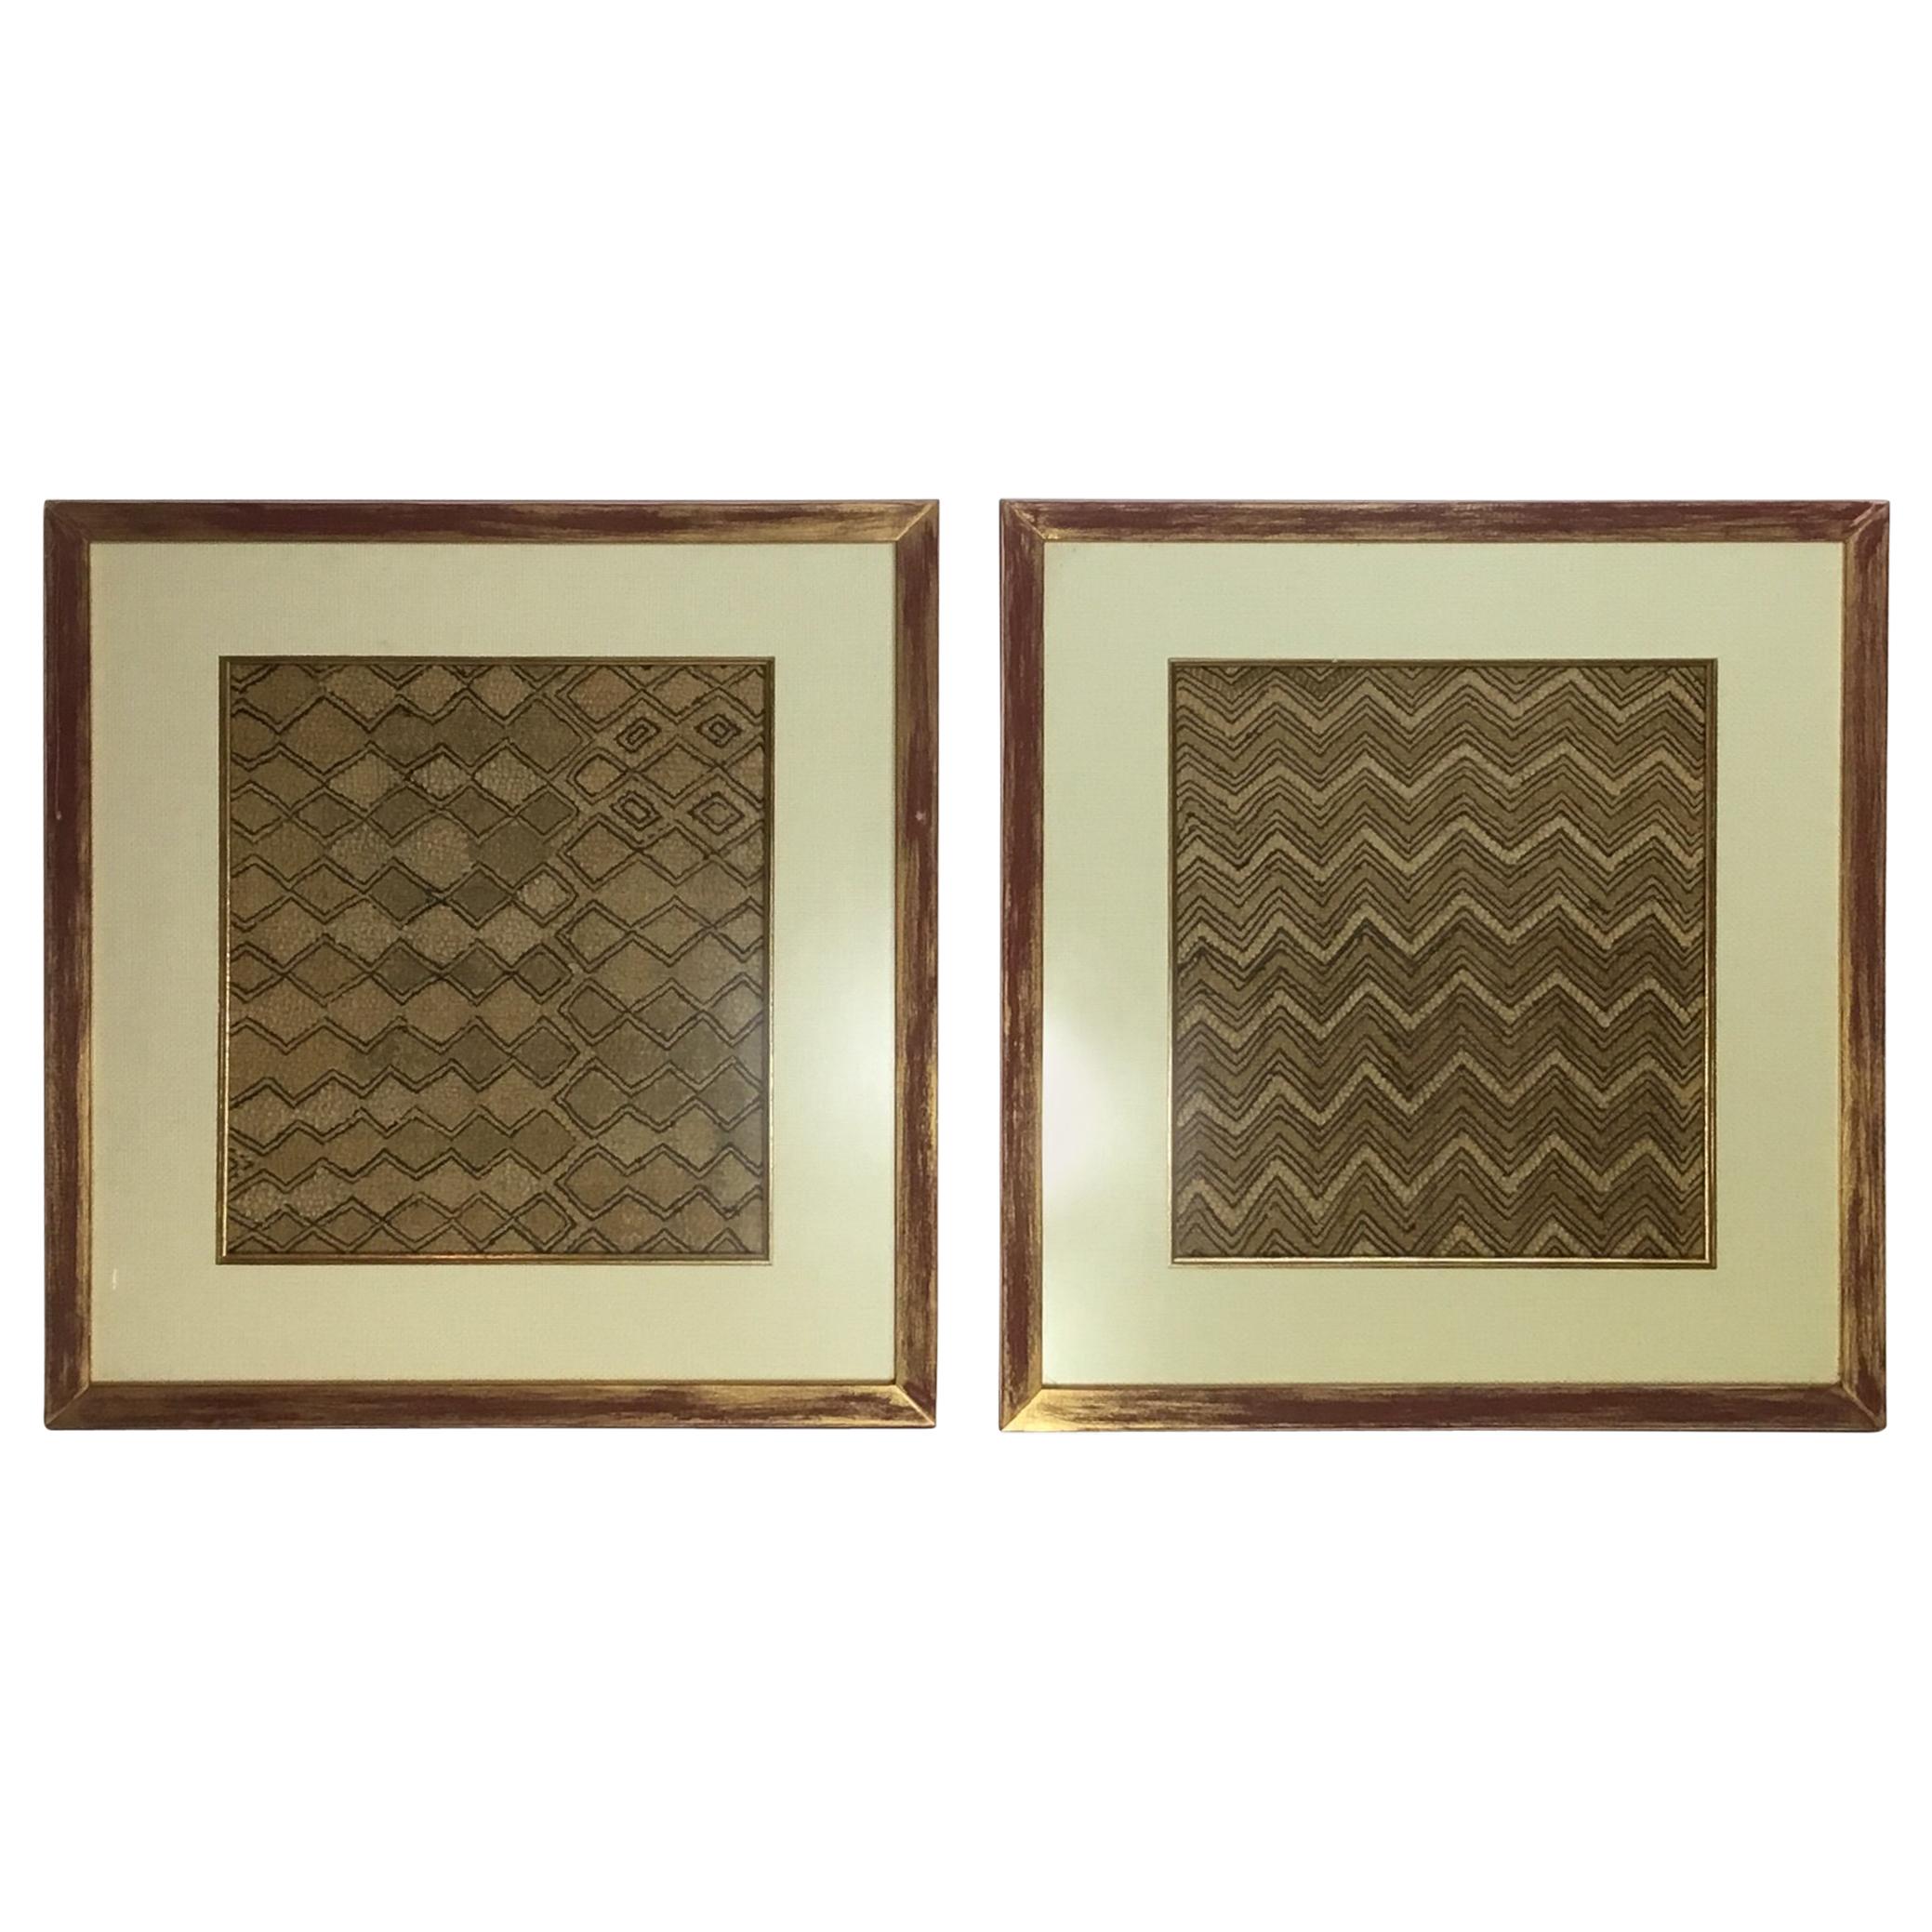 Pair of Framed Handwoven Faffia Cloth from Congo